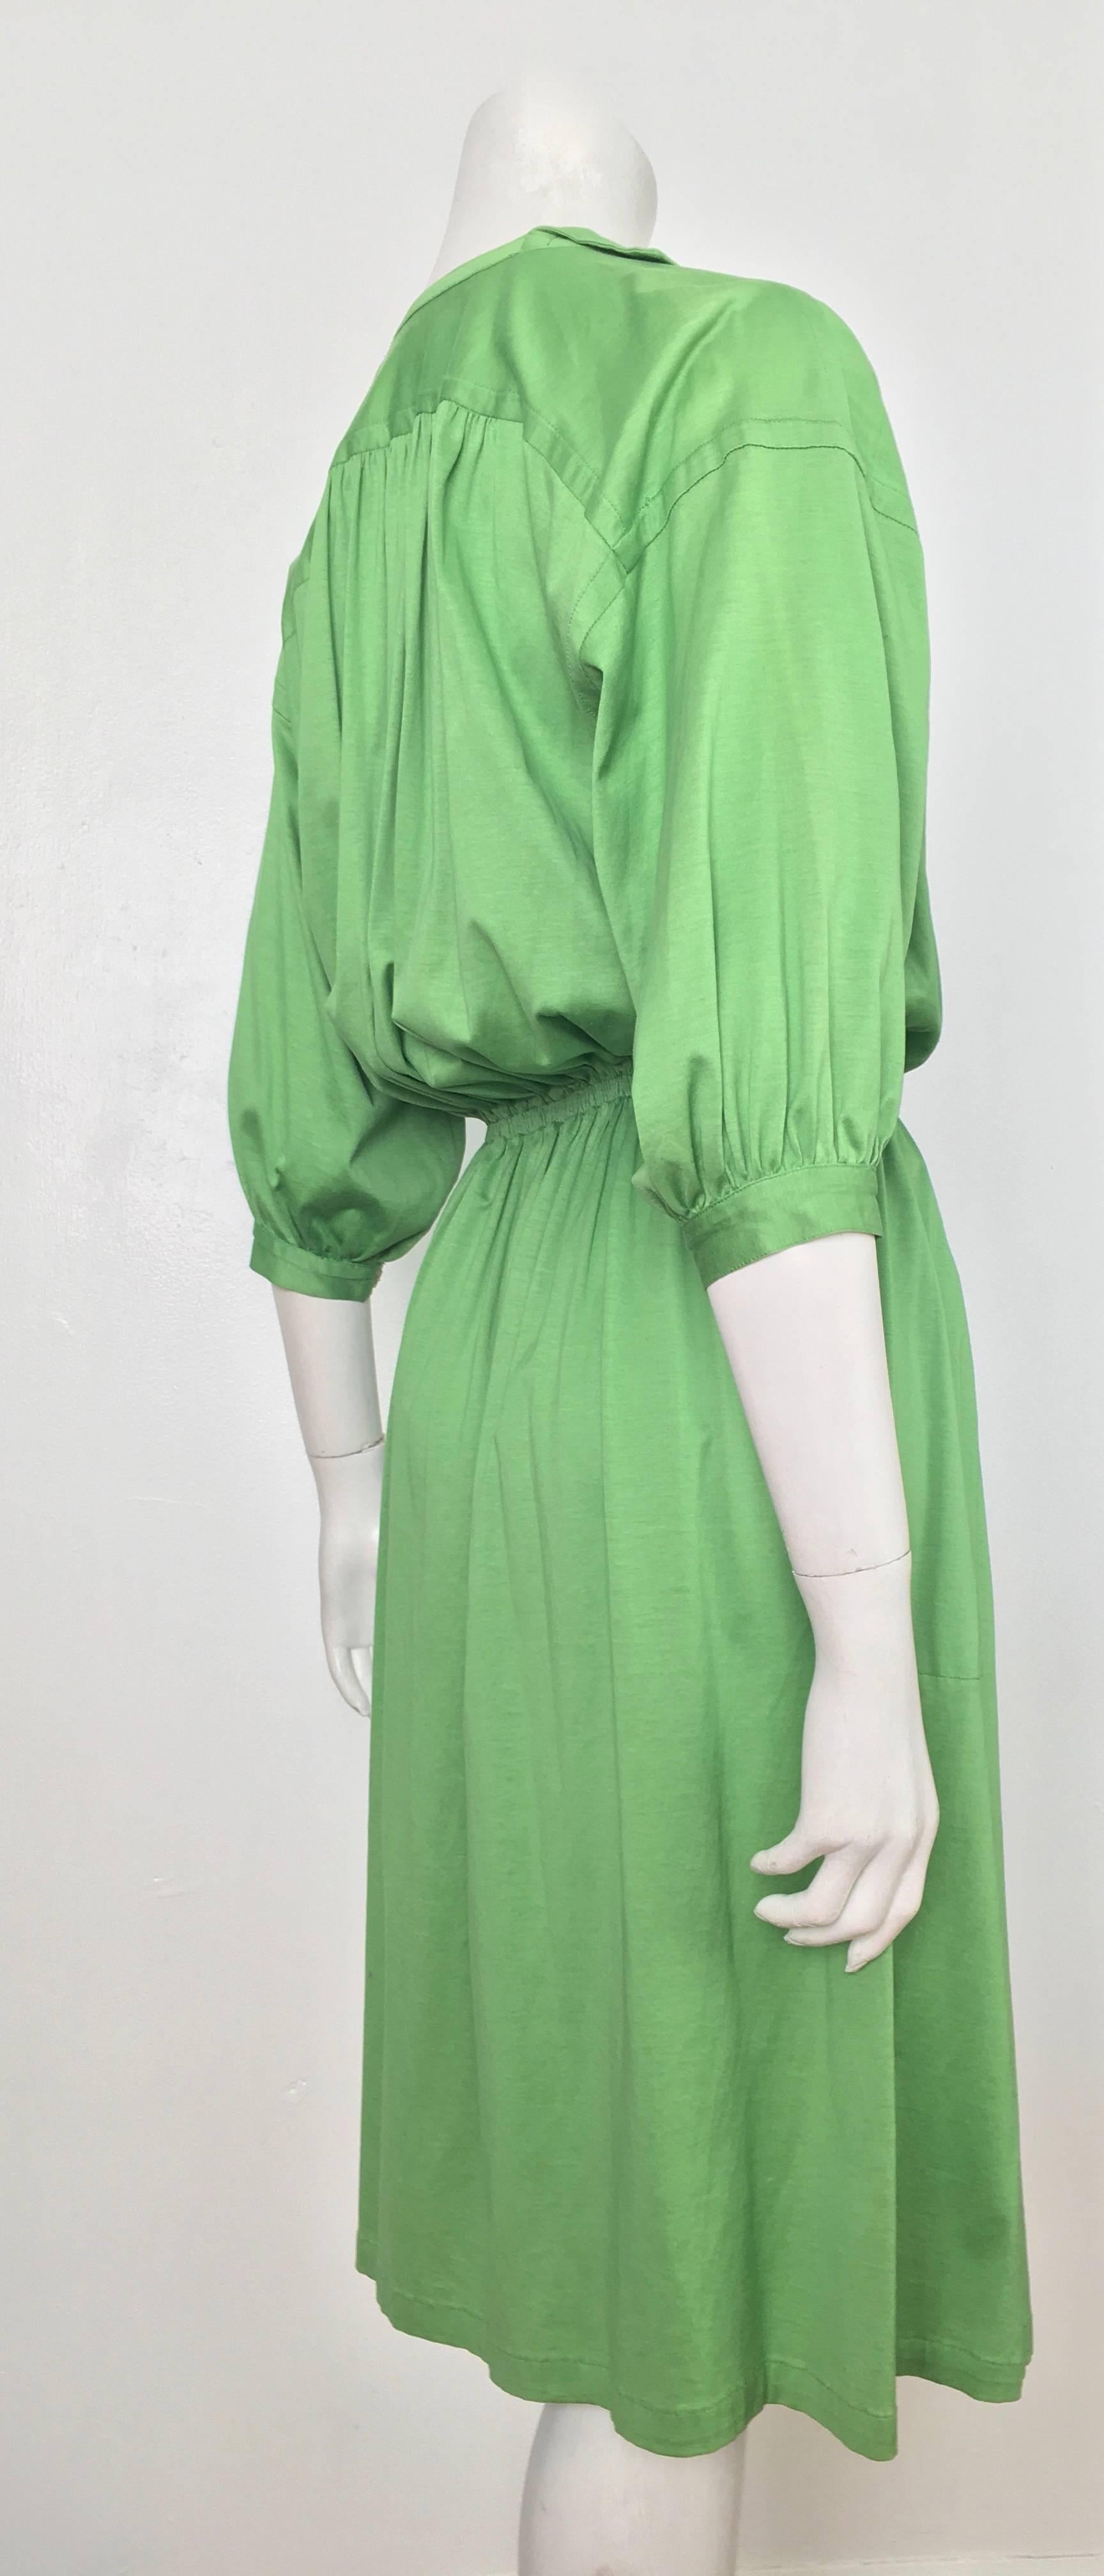 Missoni 1980s Green Cotton Casual Day Dress with Pockets Size Small. For Sale 2